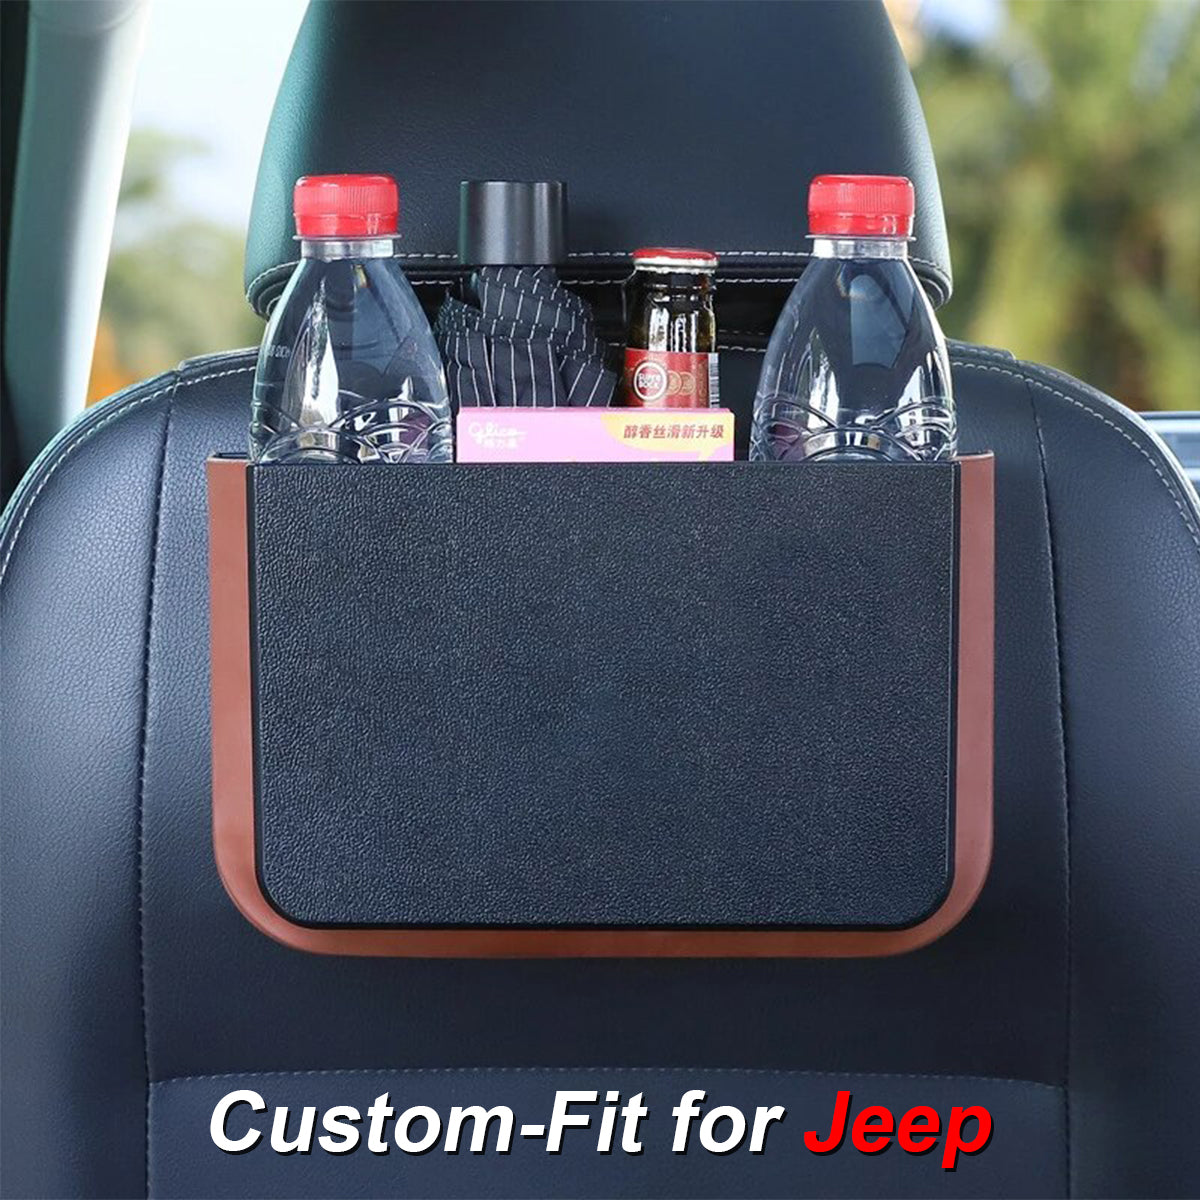 Hanging Waterproof Car Trash can-Foldable, Custom-Fit For Car, Waterproof, Equipped with Cup Holders and Trays DLJE251